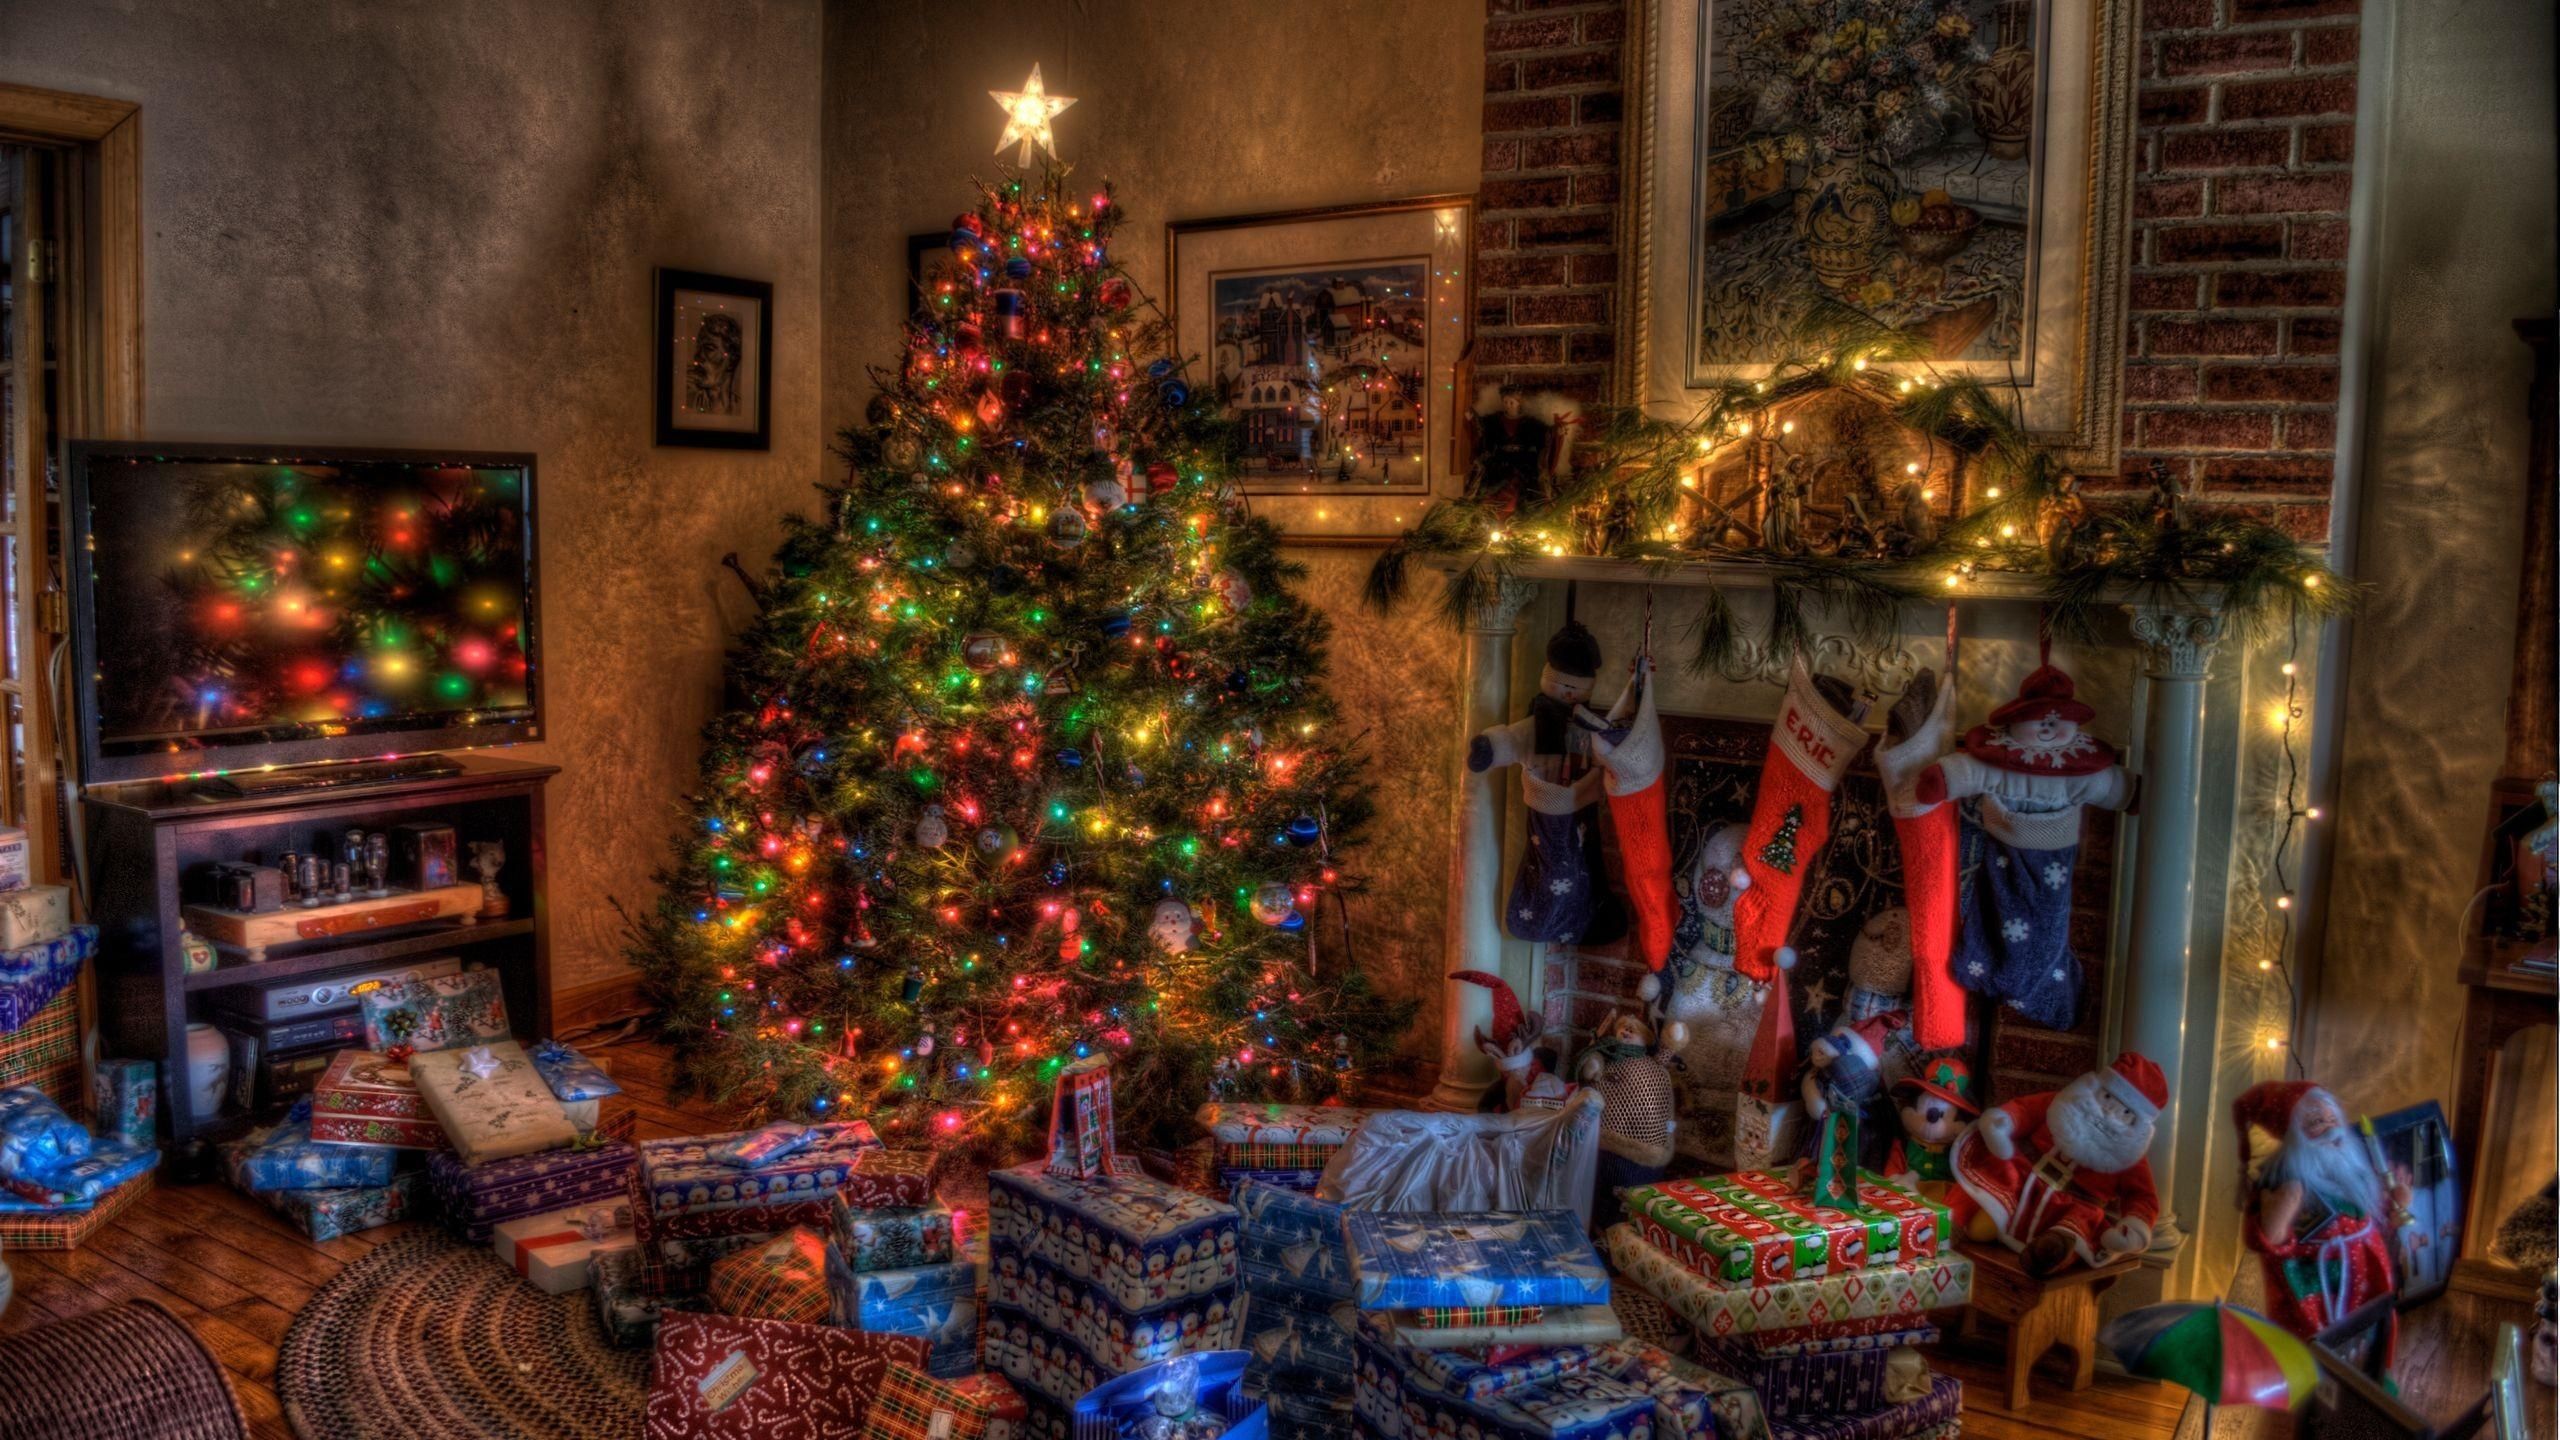 Download Wallpaper 2560x1440 Tree, Christmas, Presents, Fireplace ...